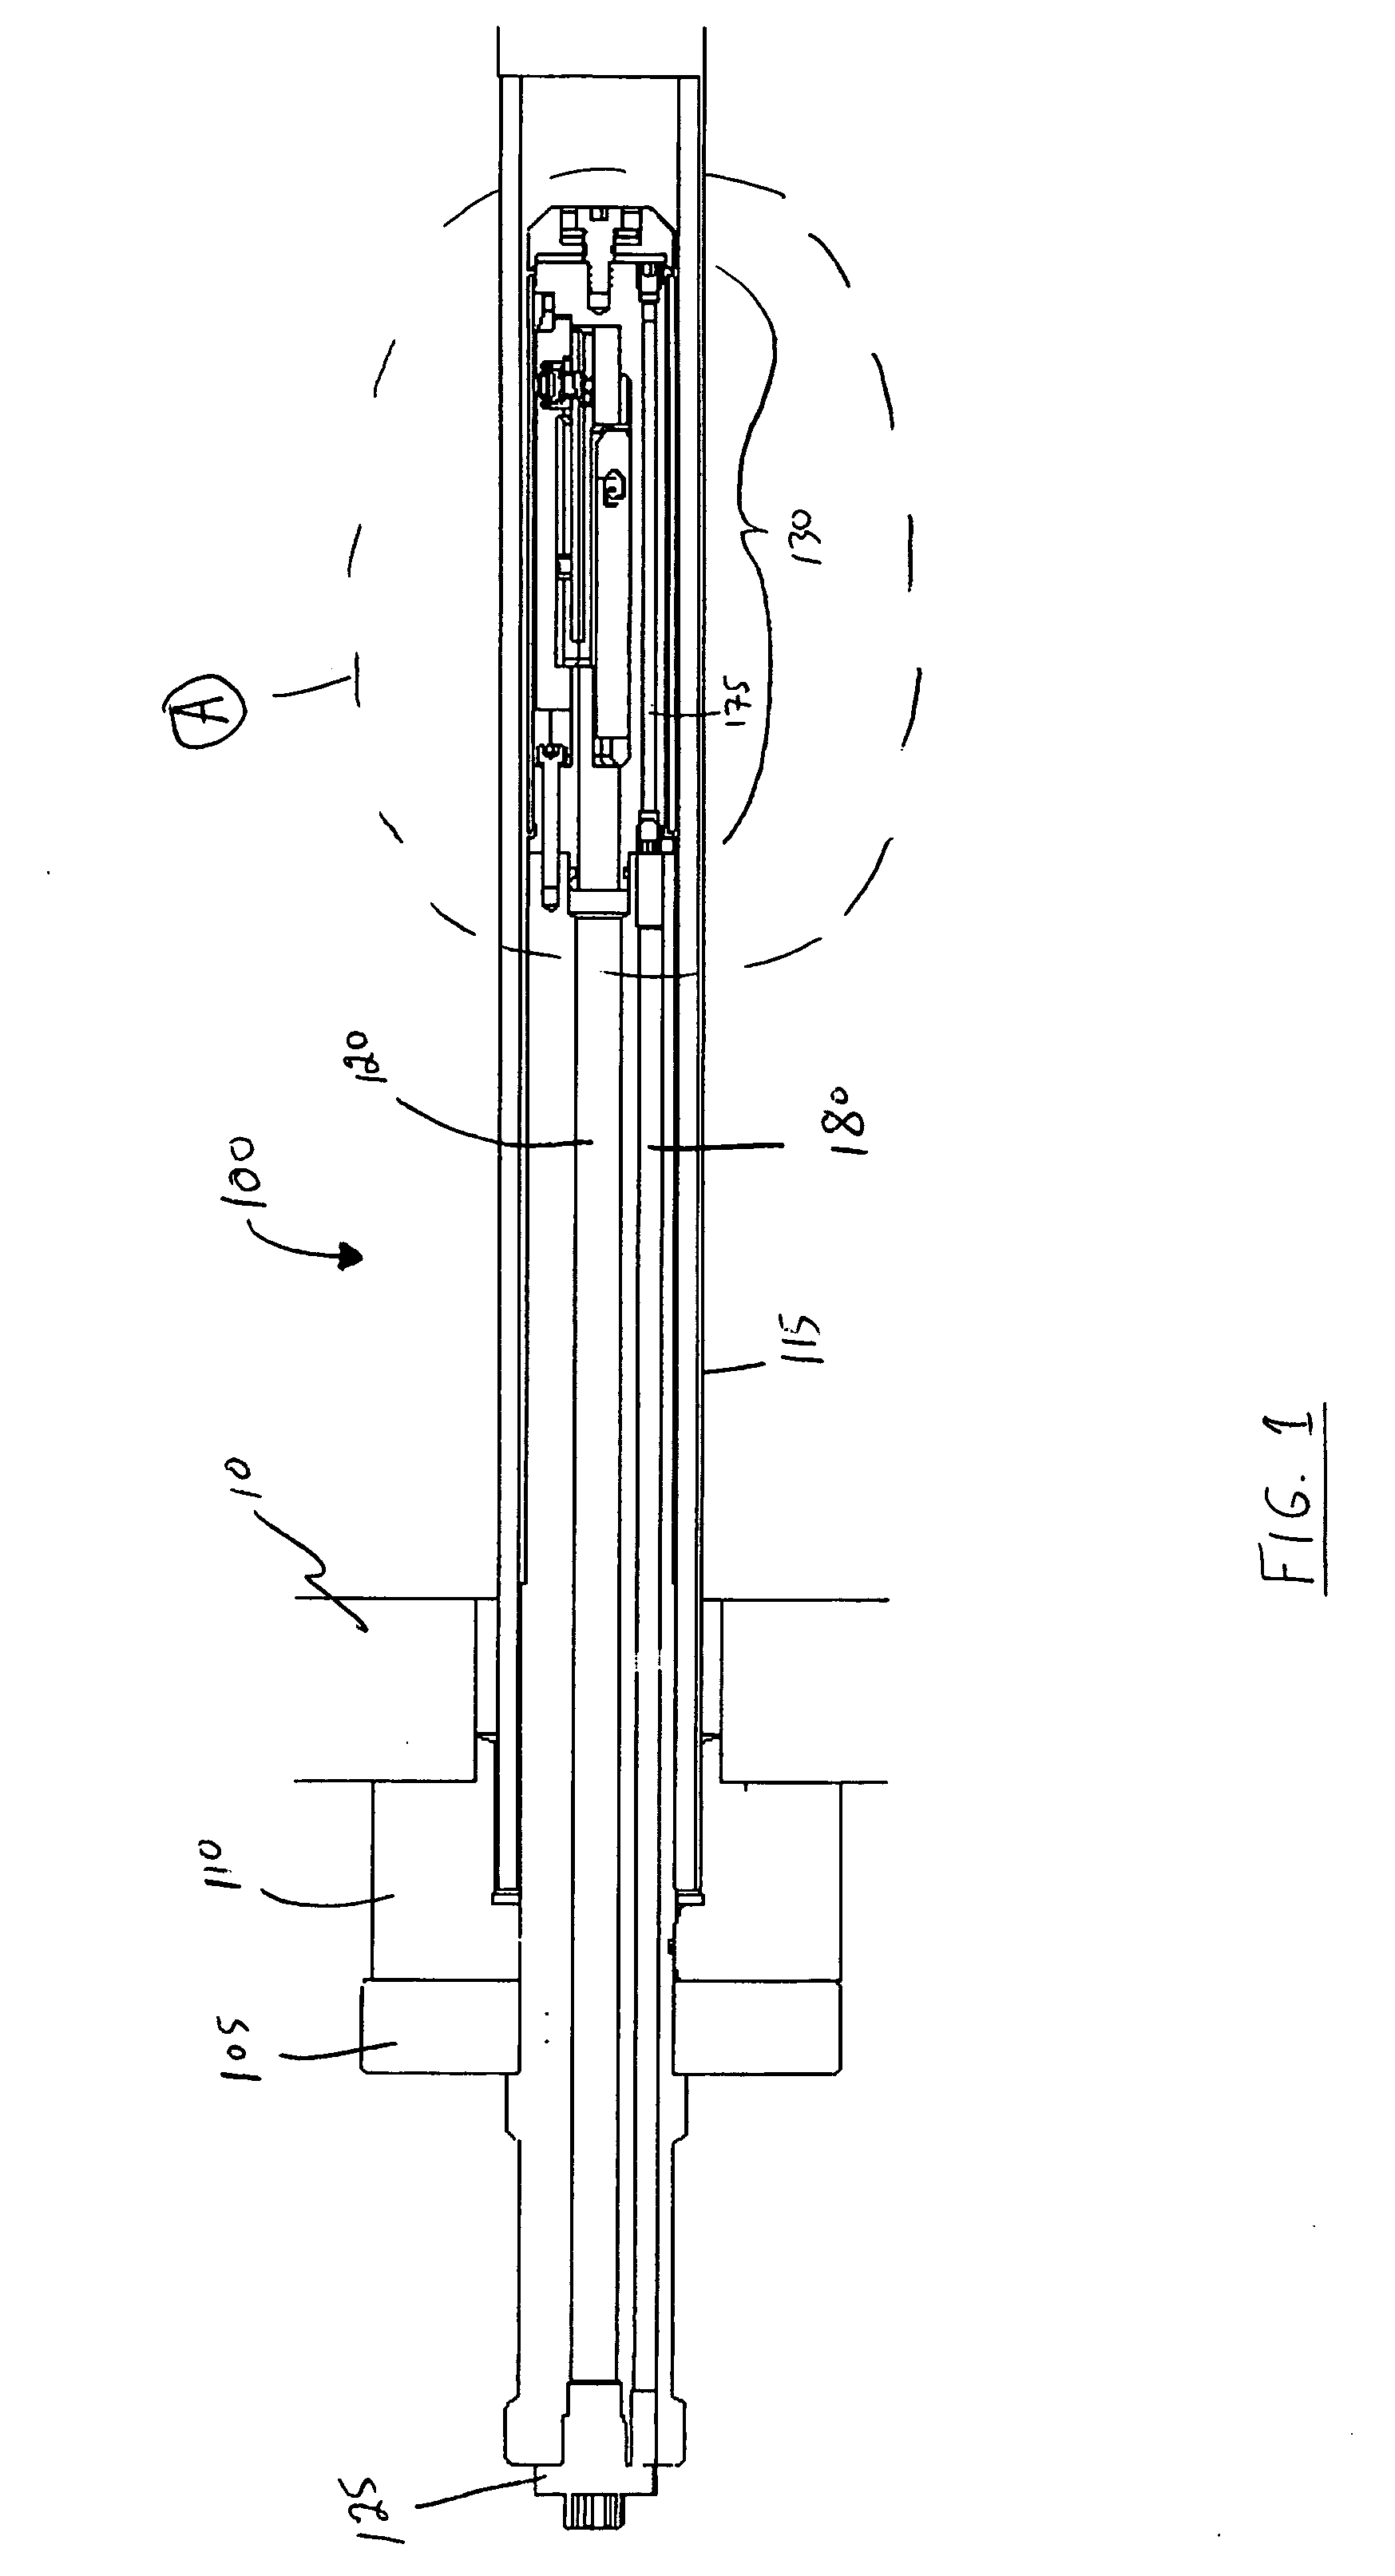 Radiation sensor device and fluid treatment system containing same